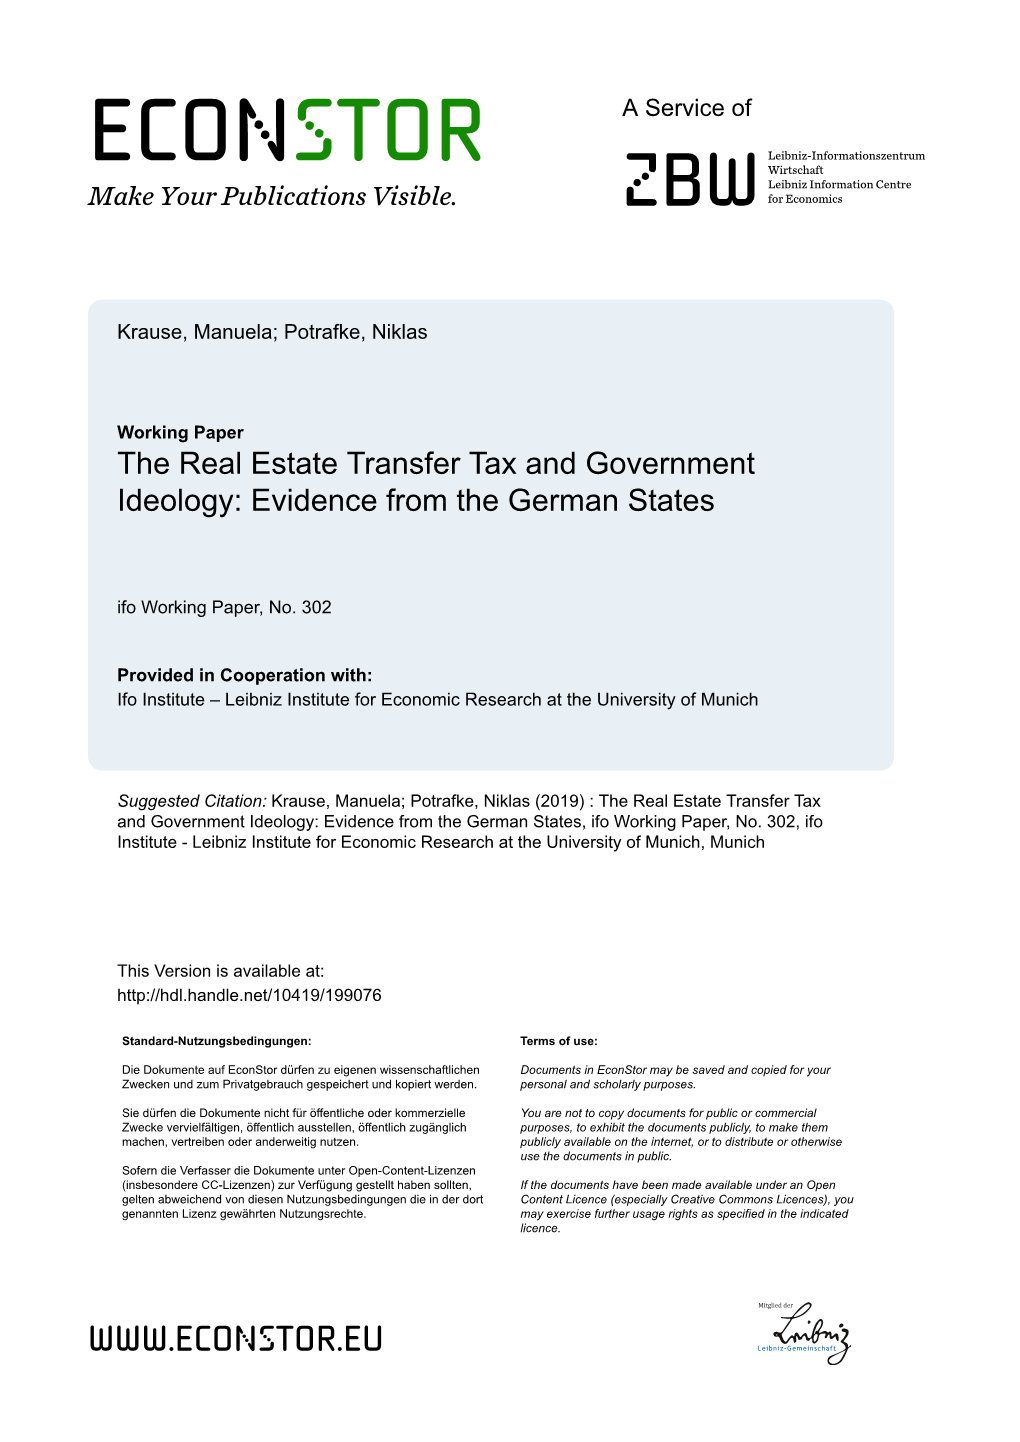 The Real Estate Transfer Tax and Government Ideology: Evidence from the German States